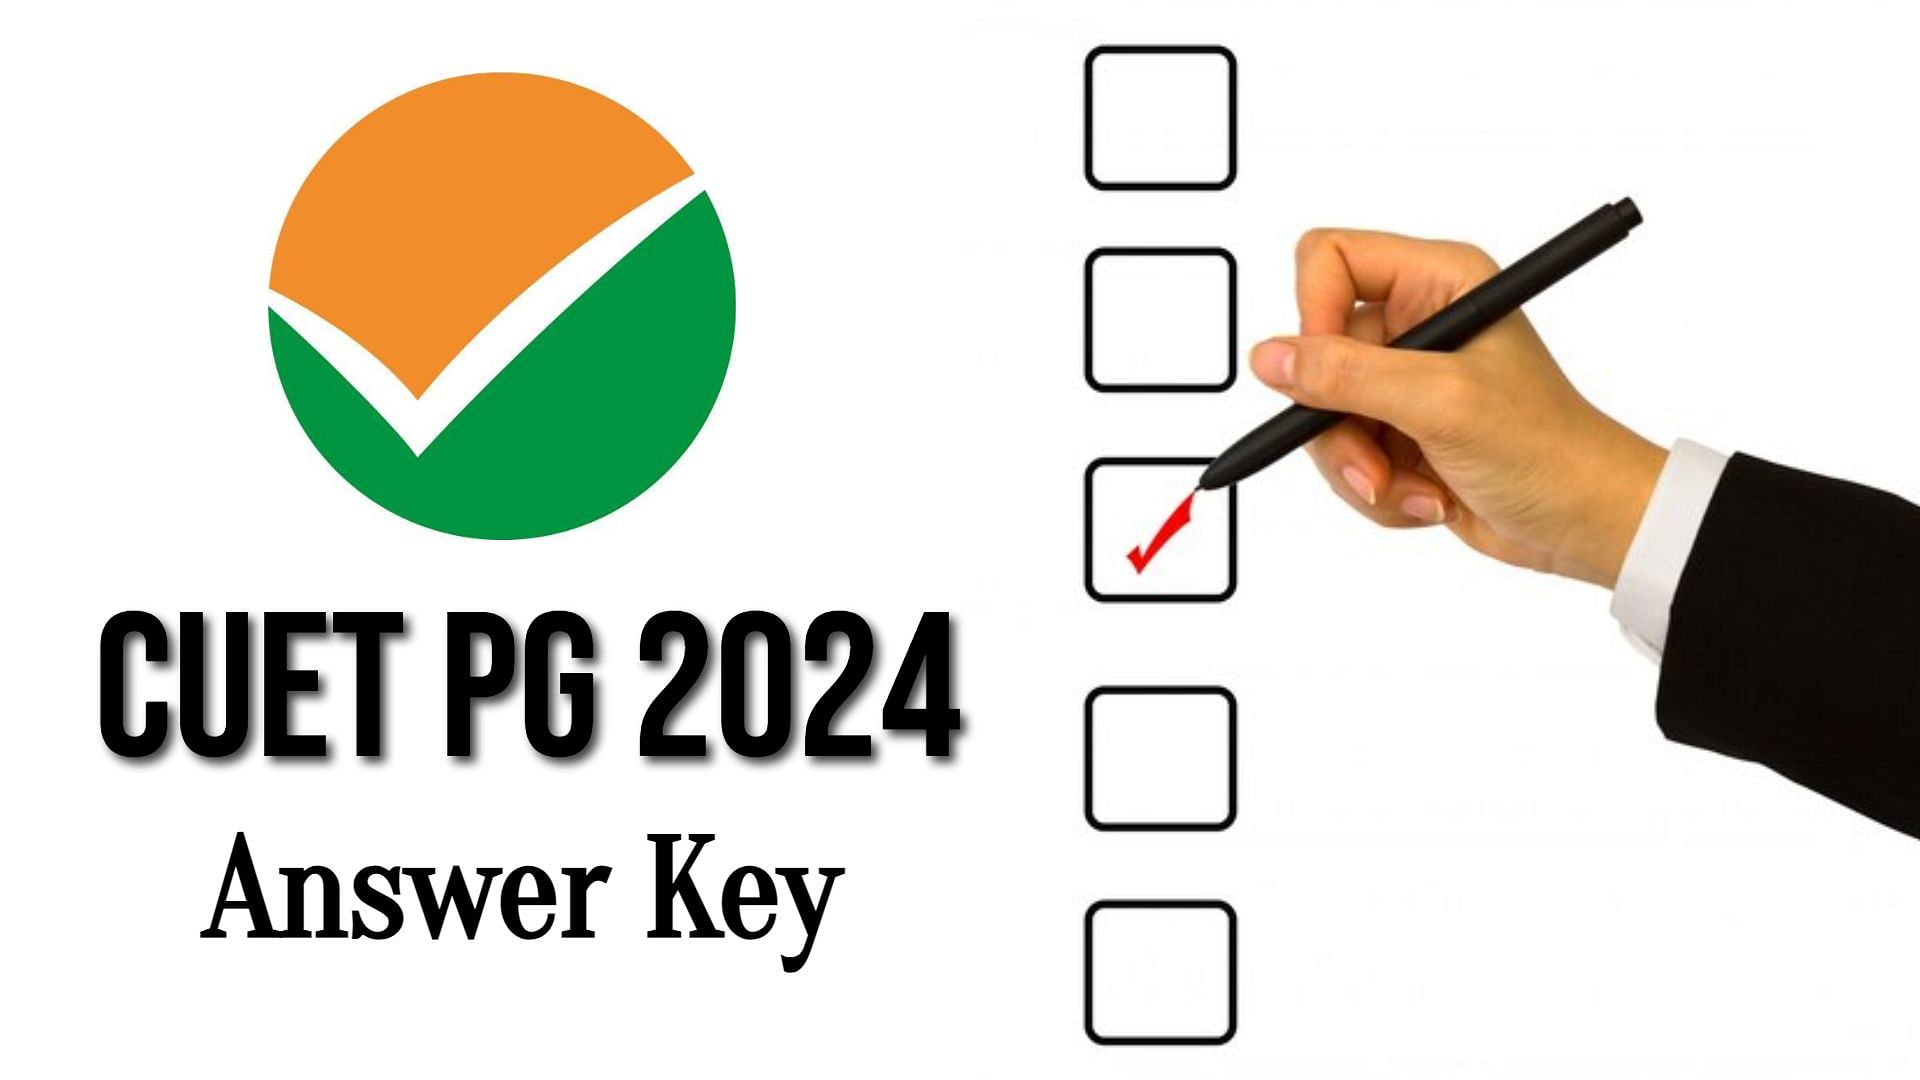 CUET PG Final Answer Key 2024 Out Now, 92 Questions Dropped, Download From pgcuet.samarth.ac.in